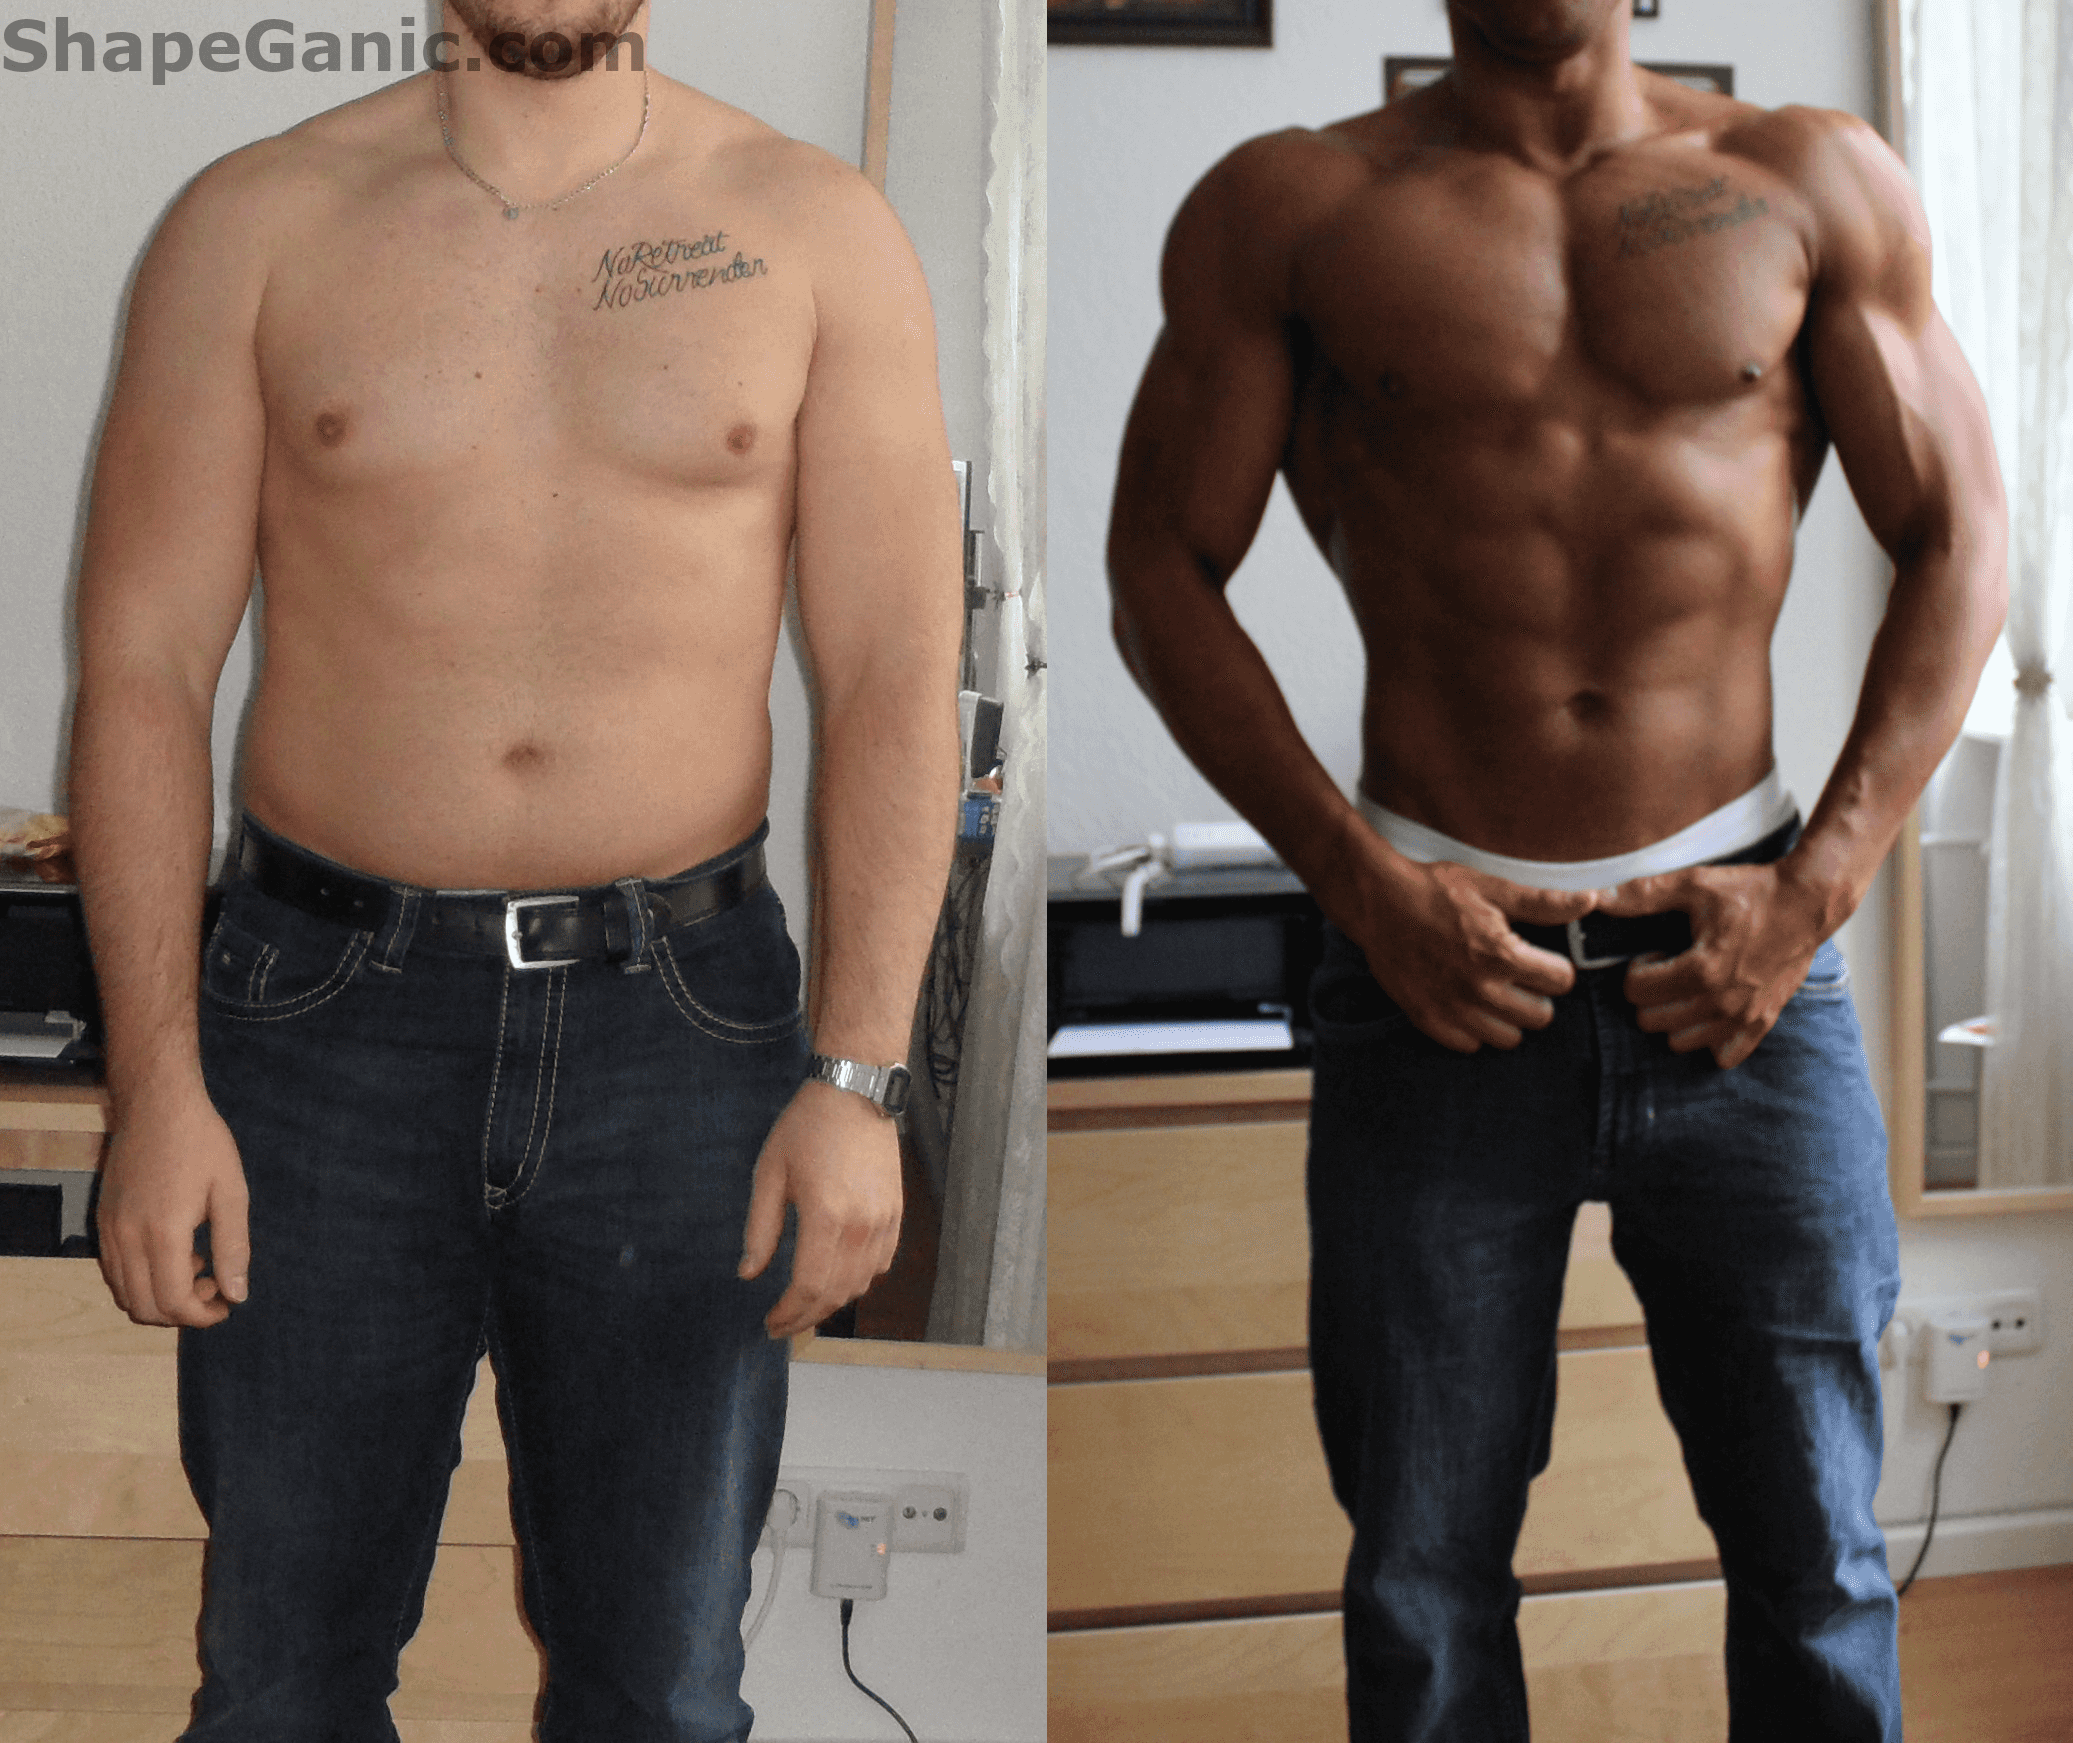 Can you lose fat and gain muscle at the same time?